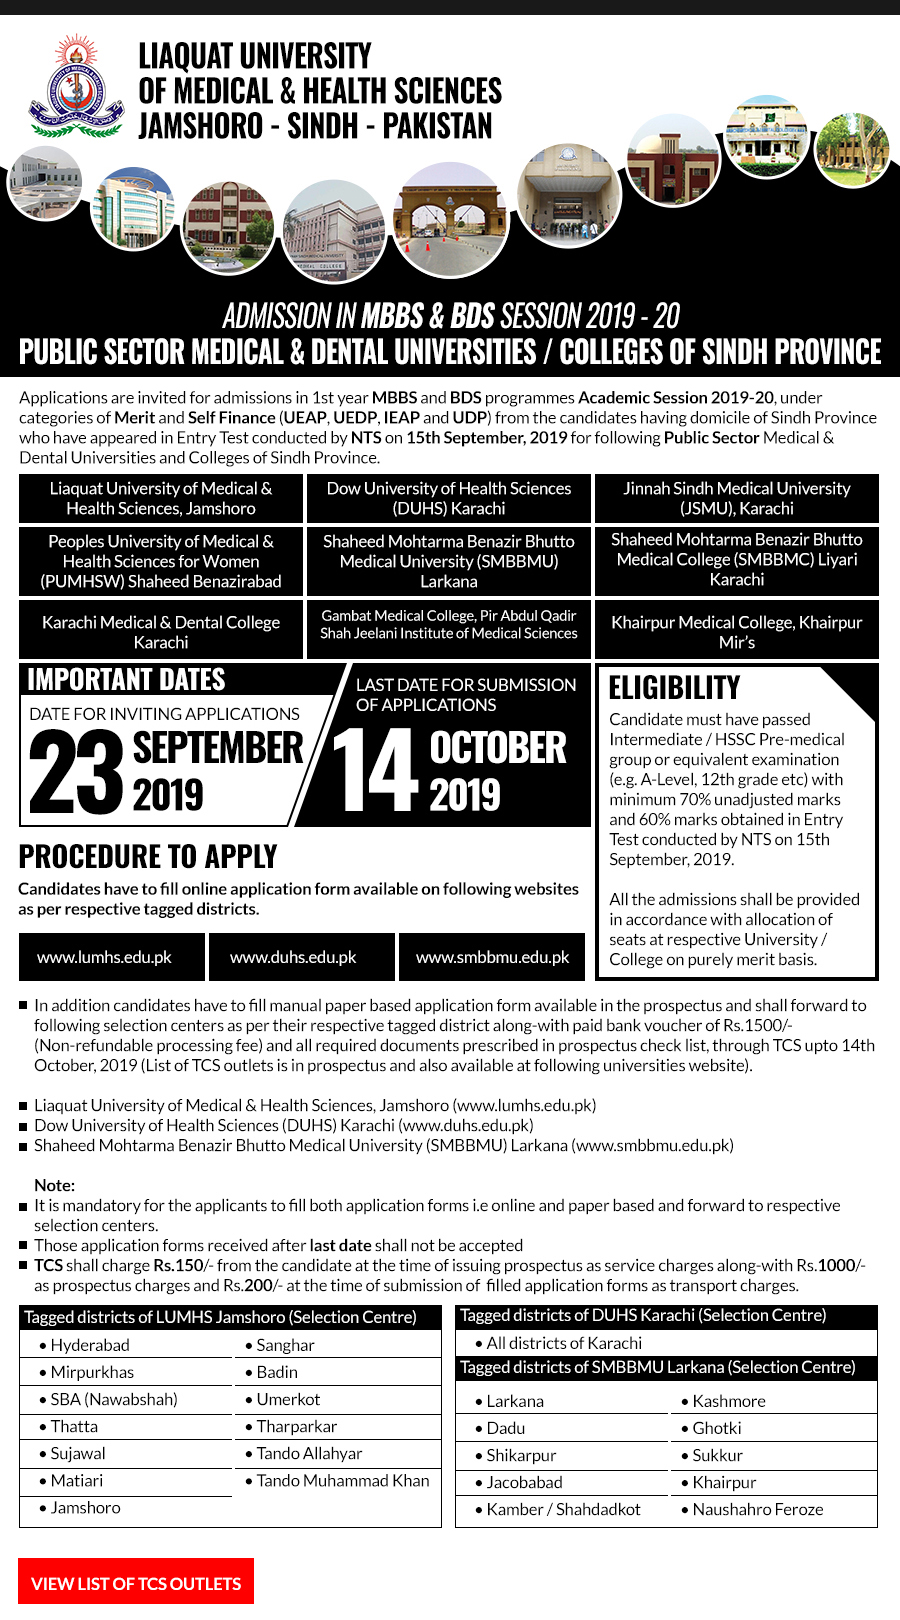 Sindh And Karachi Medical Colleges Admission Announced For 2019